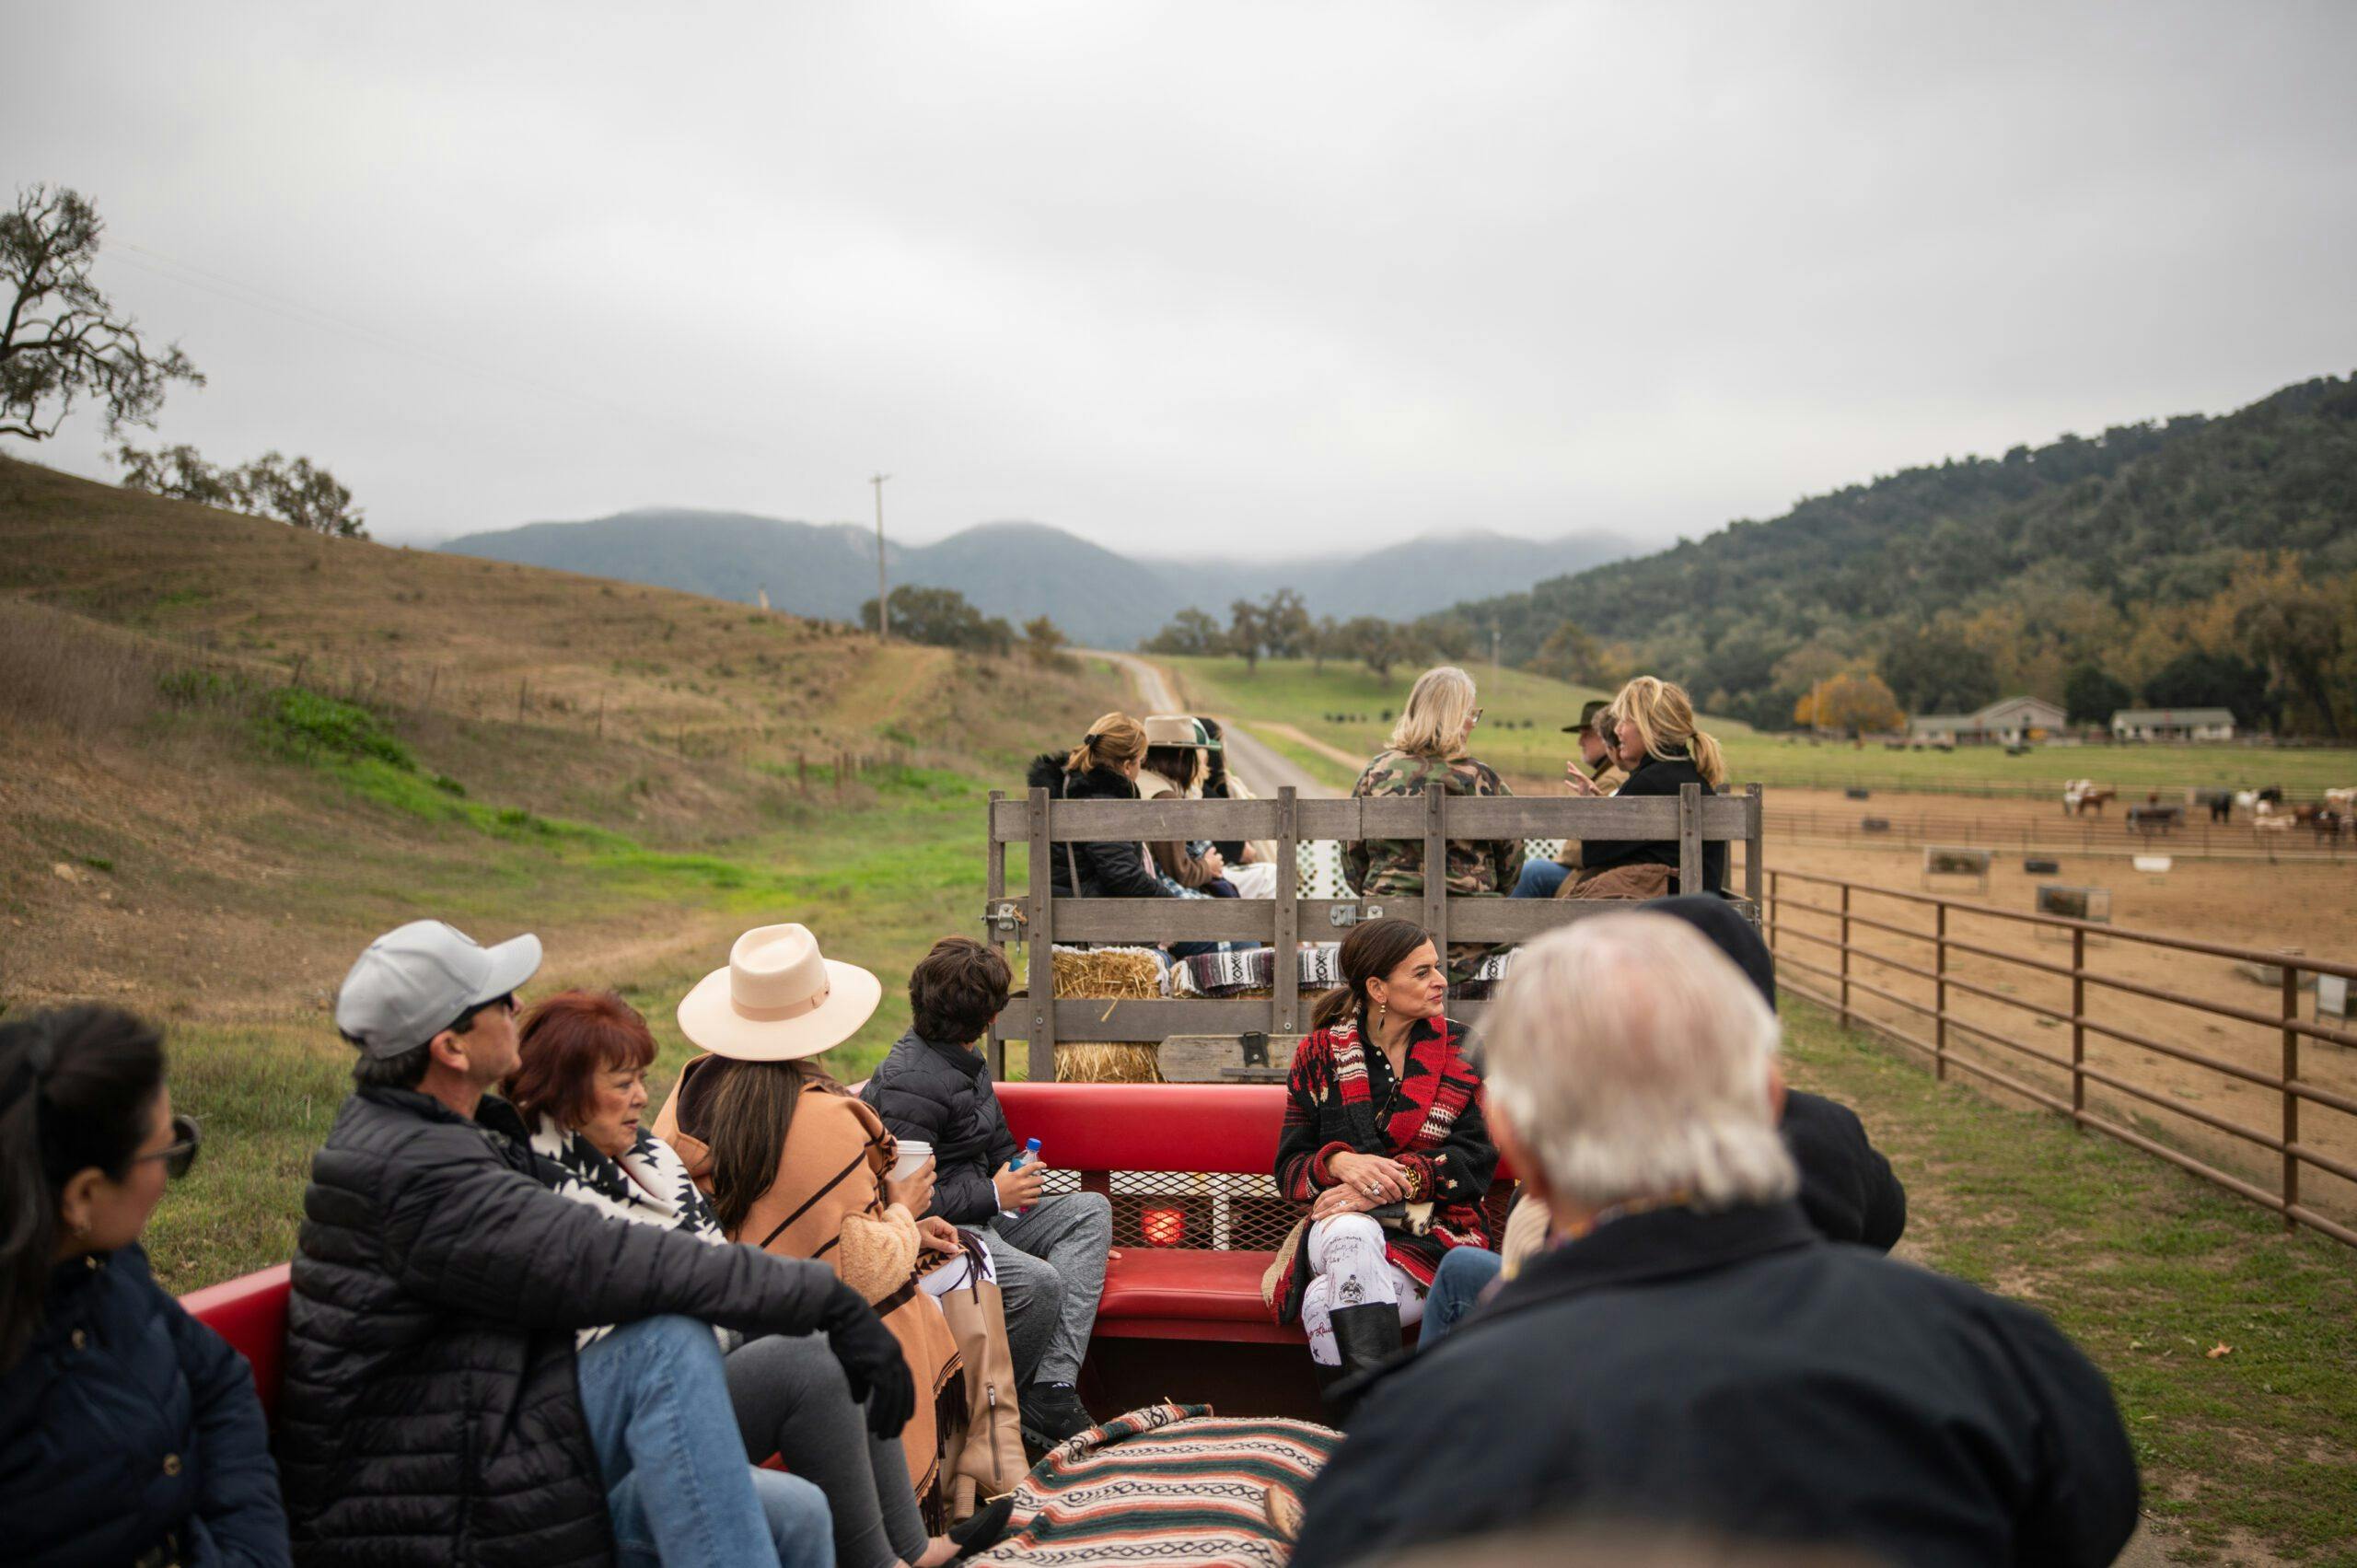 group of people on a wagon ride along the ranch